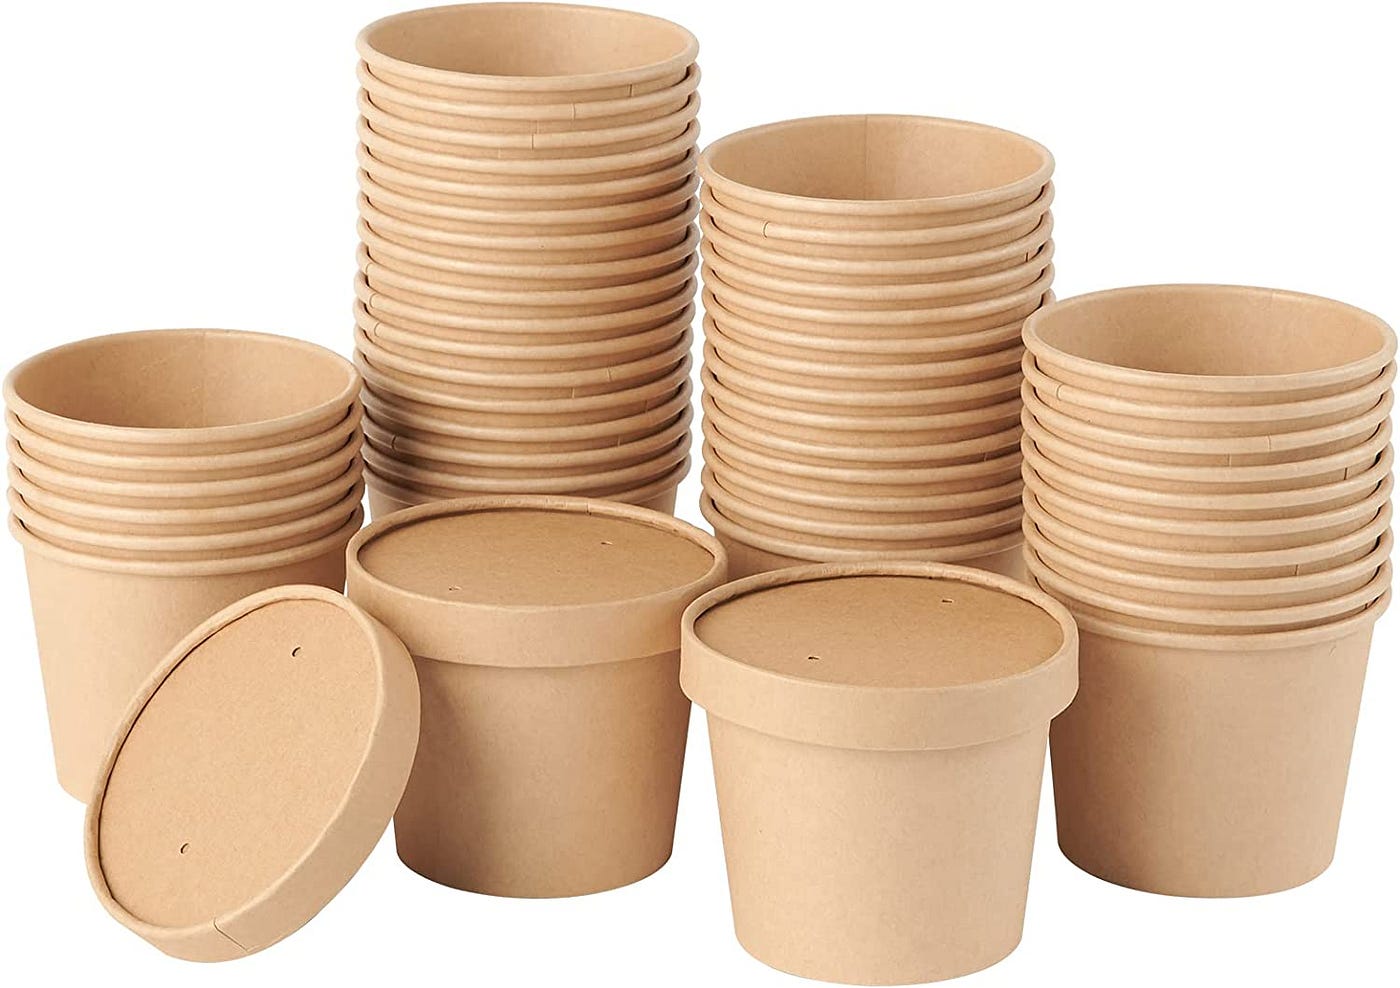 5 types of best disposable paper soup bowls with lids, by Gloria Stucky